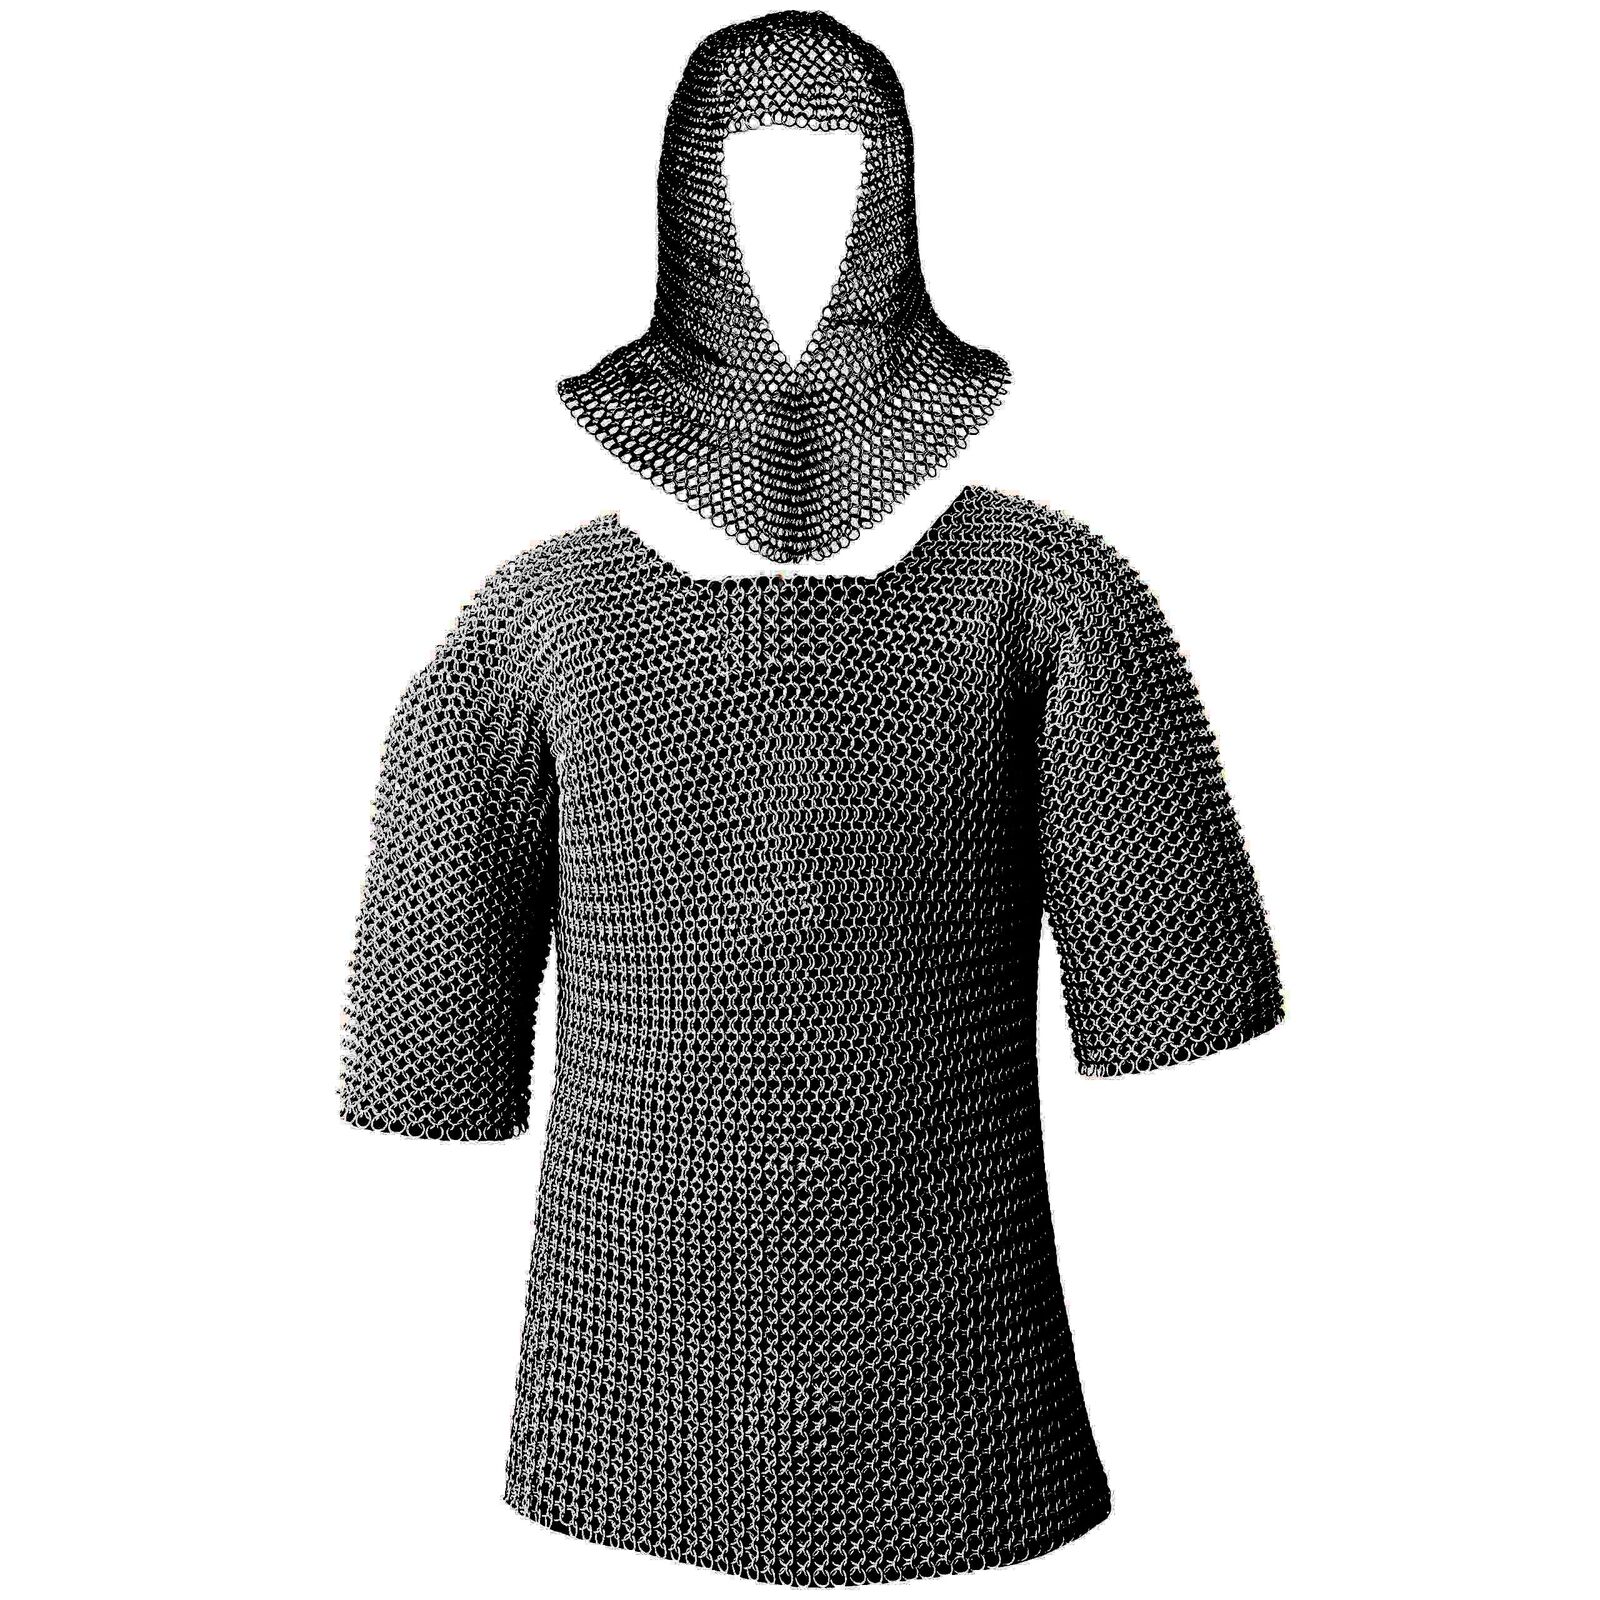 Medieval Chainmail Armor Shirt with Coif Viking Knight Costume Natural Medium